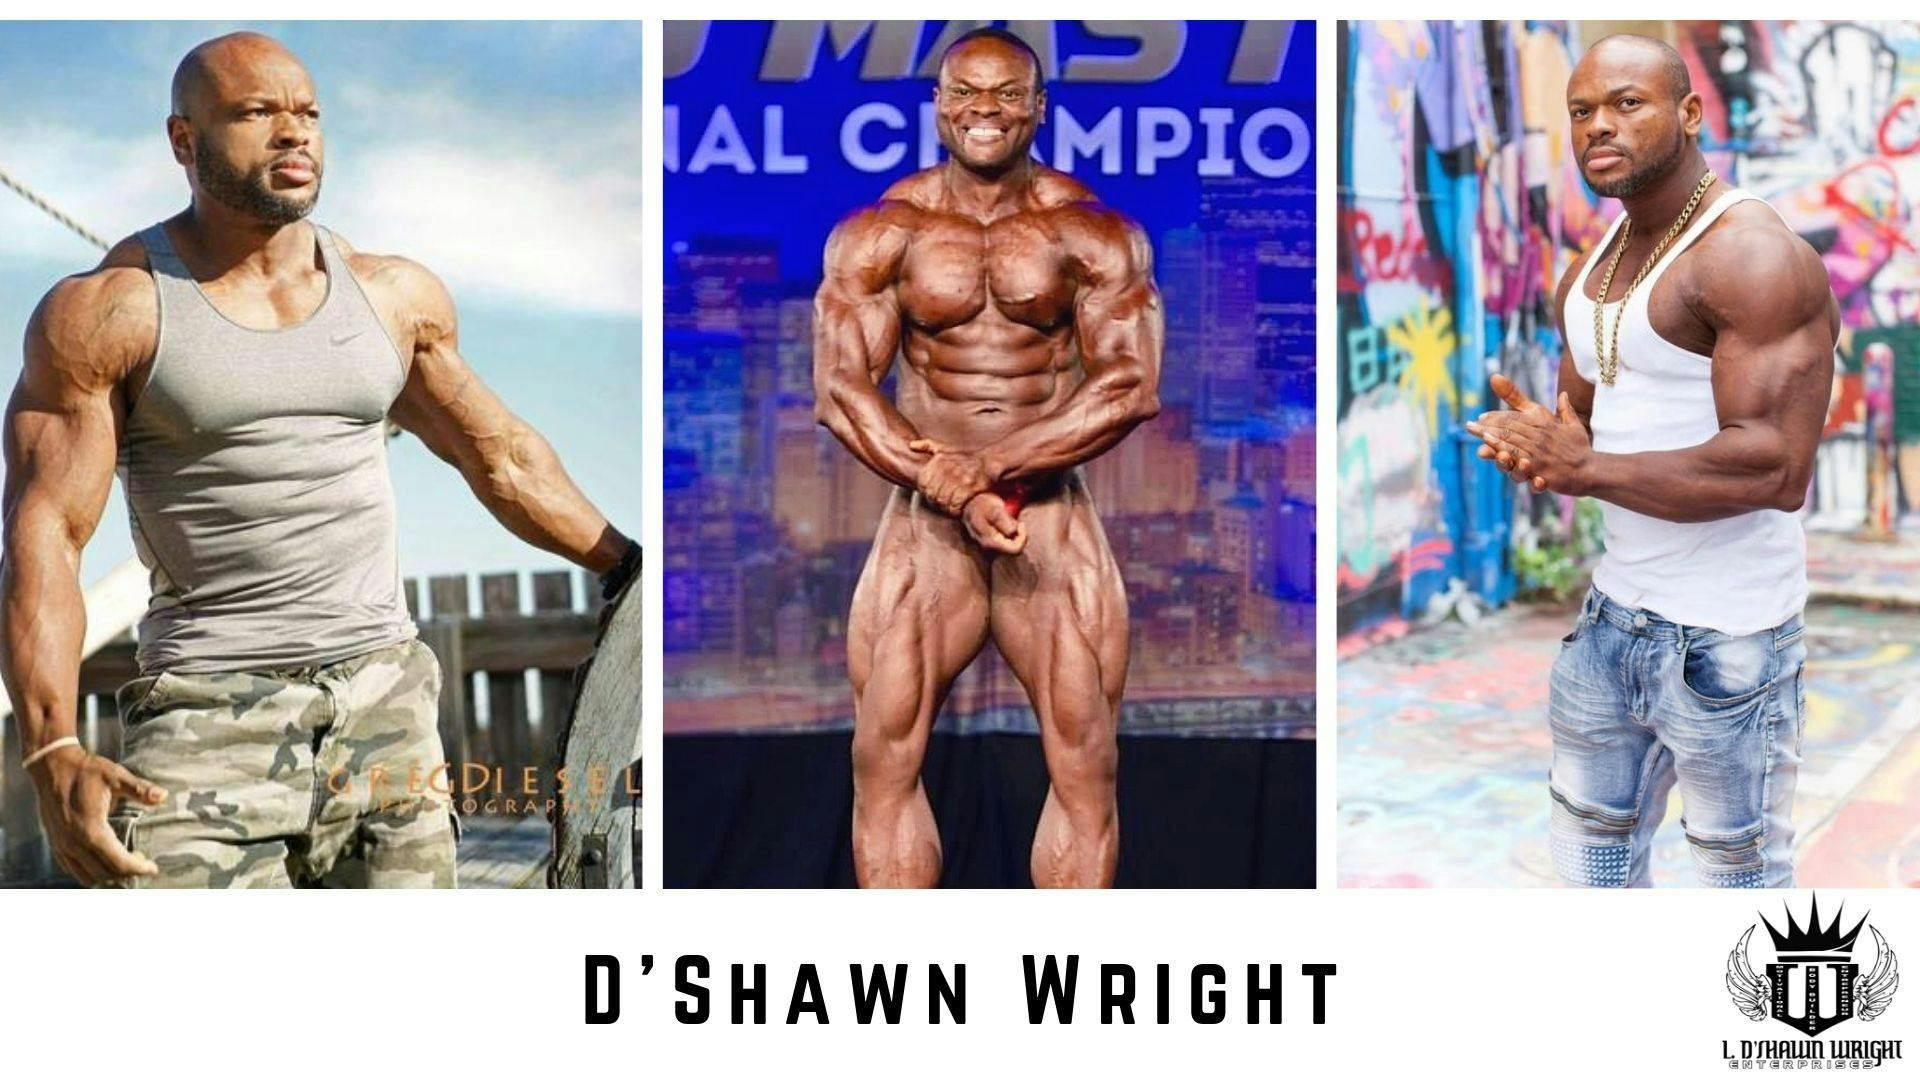 Champion Bodybuilder D'Shawn Wright on Staying Motivated